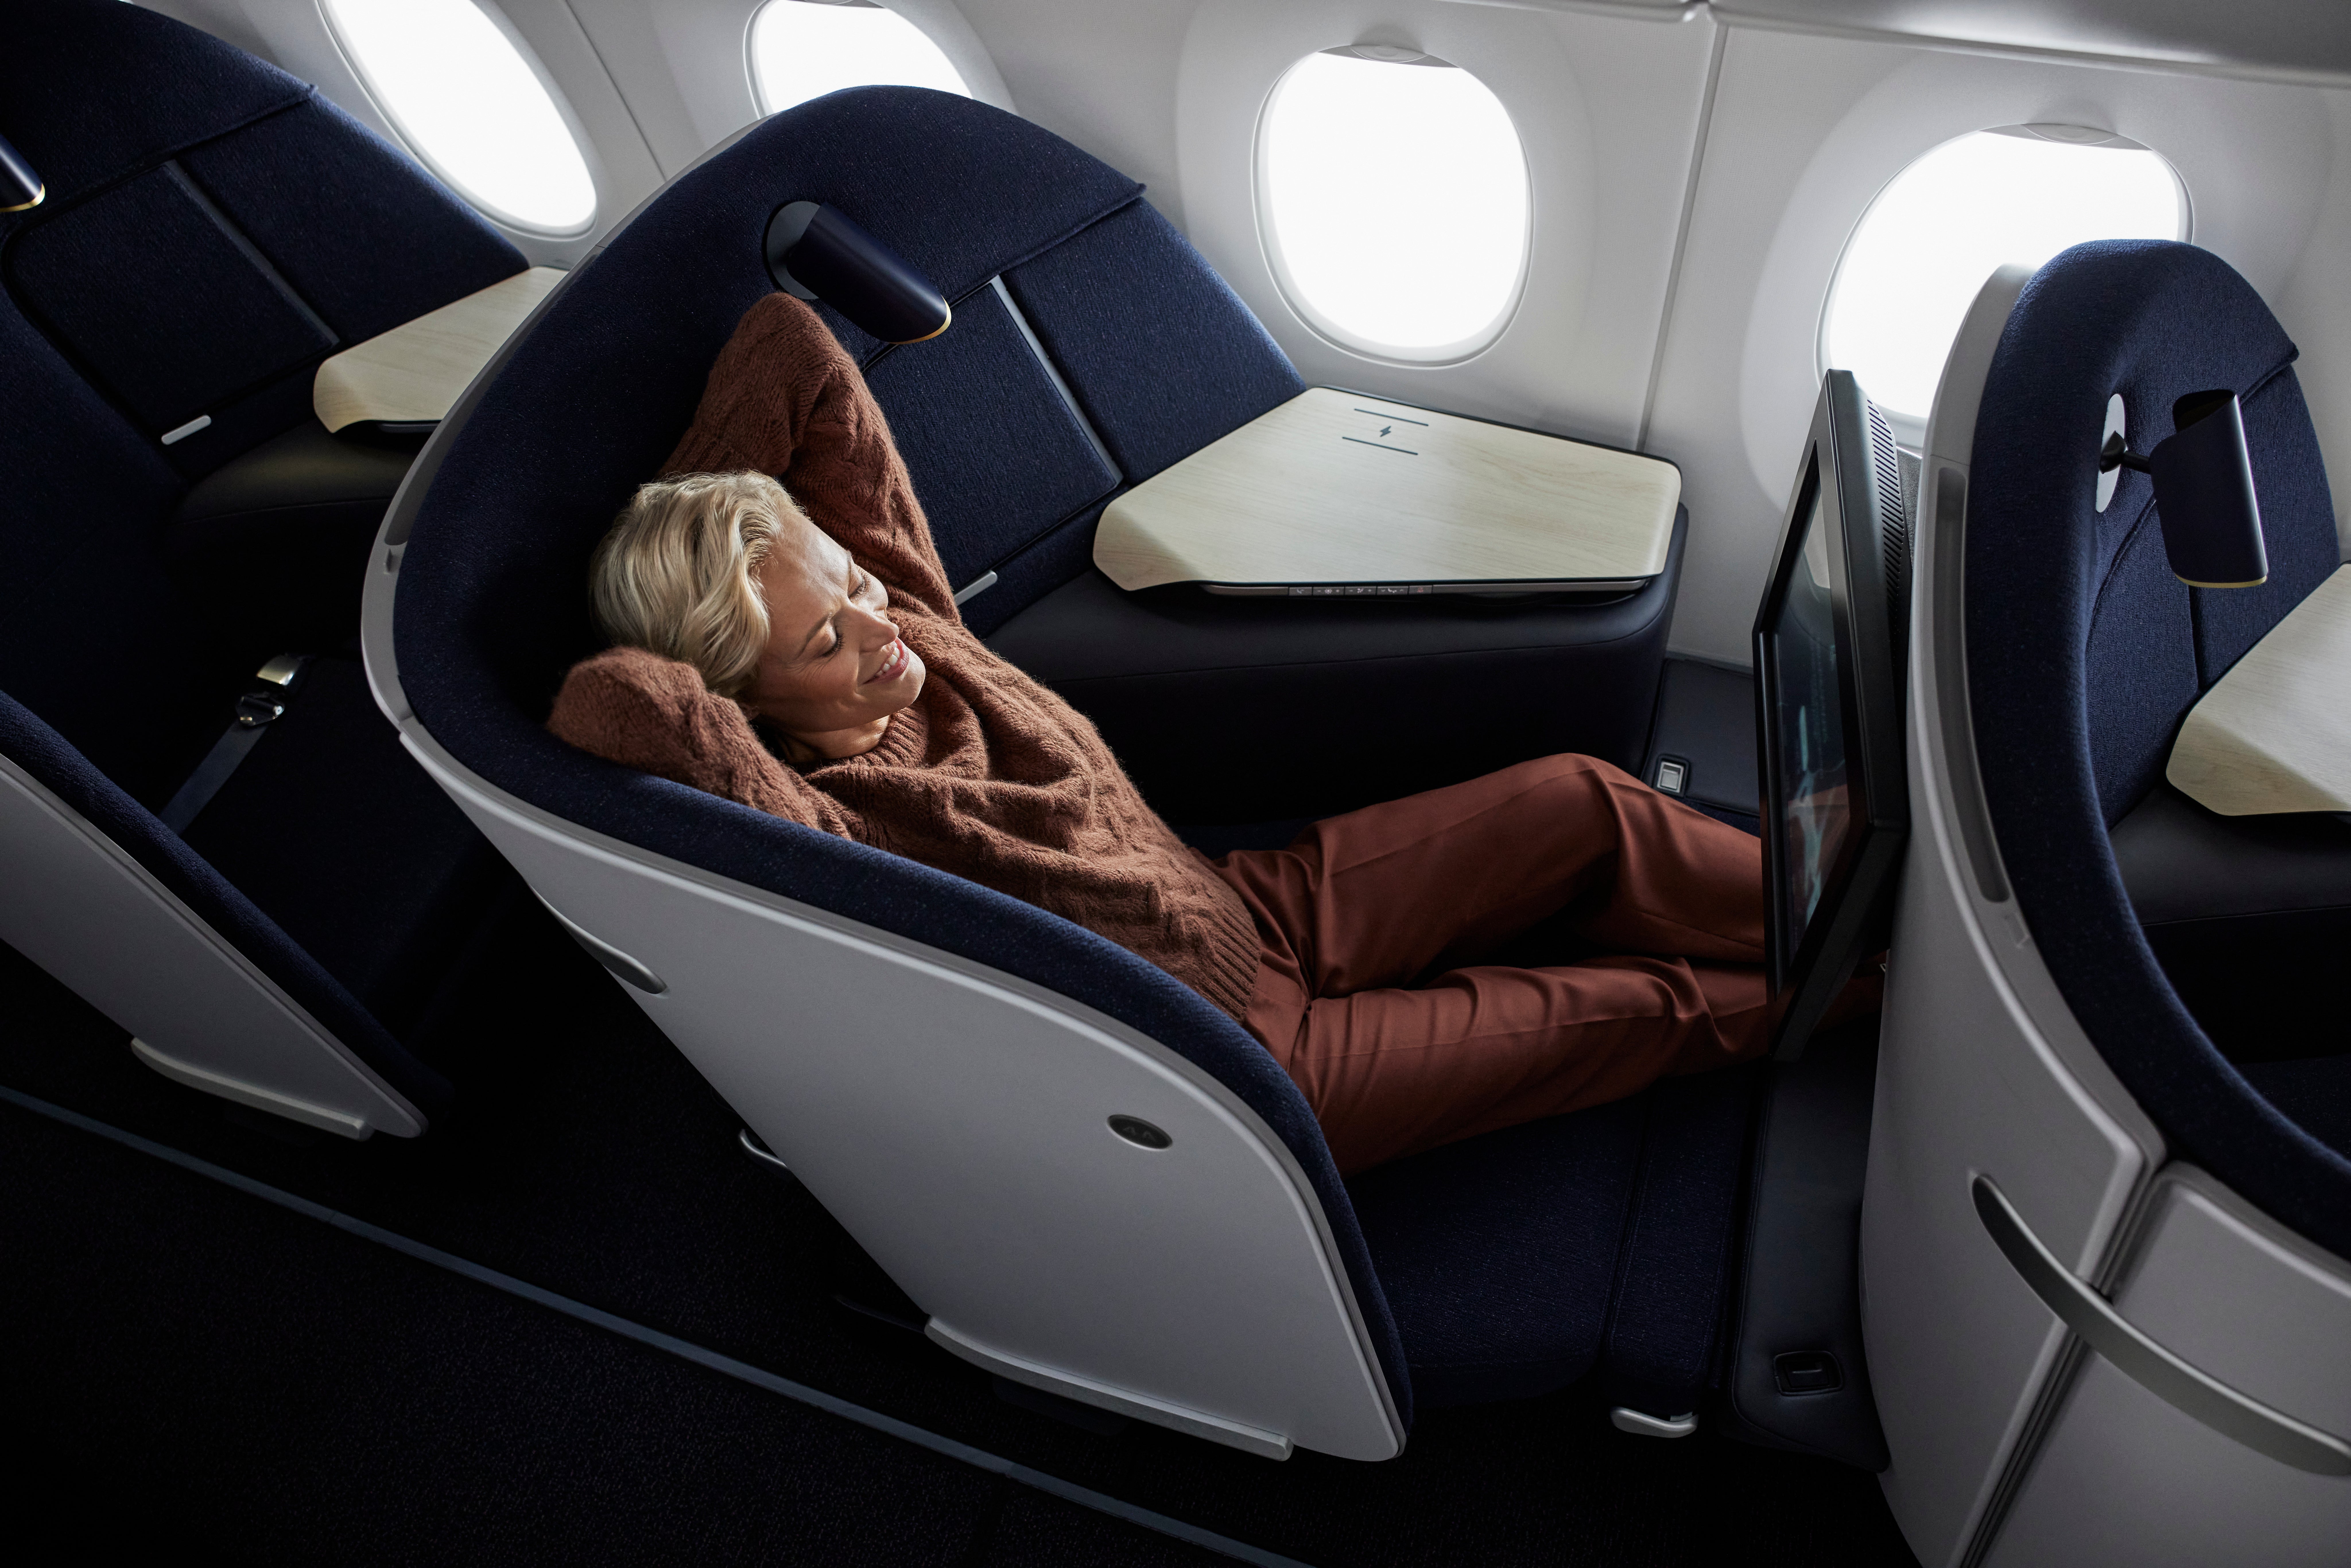 Finnair says its new non-reclining business seat allows more lounge-like space to get comfortable